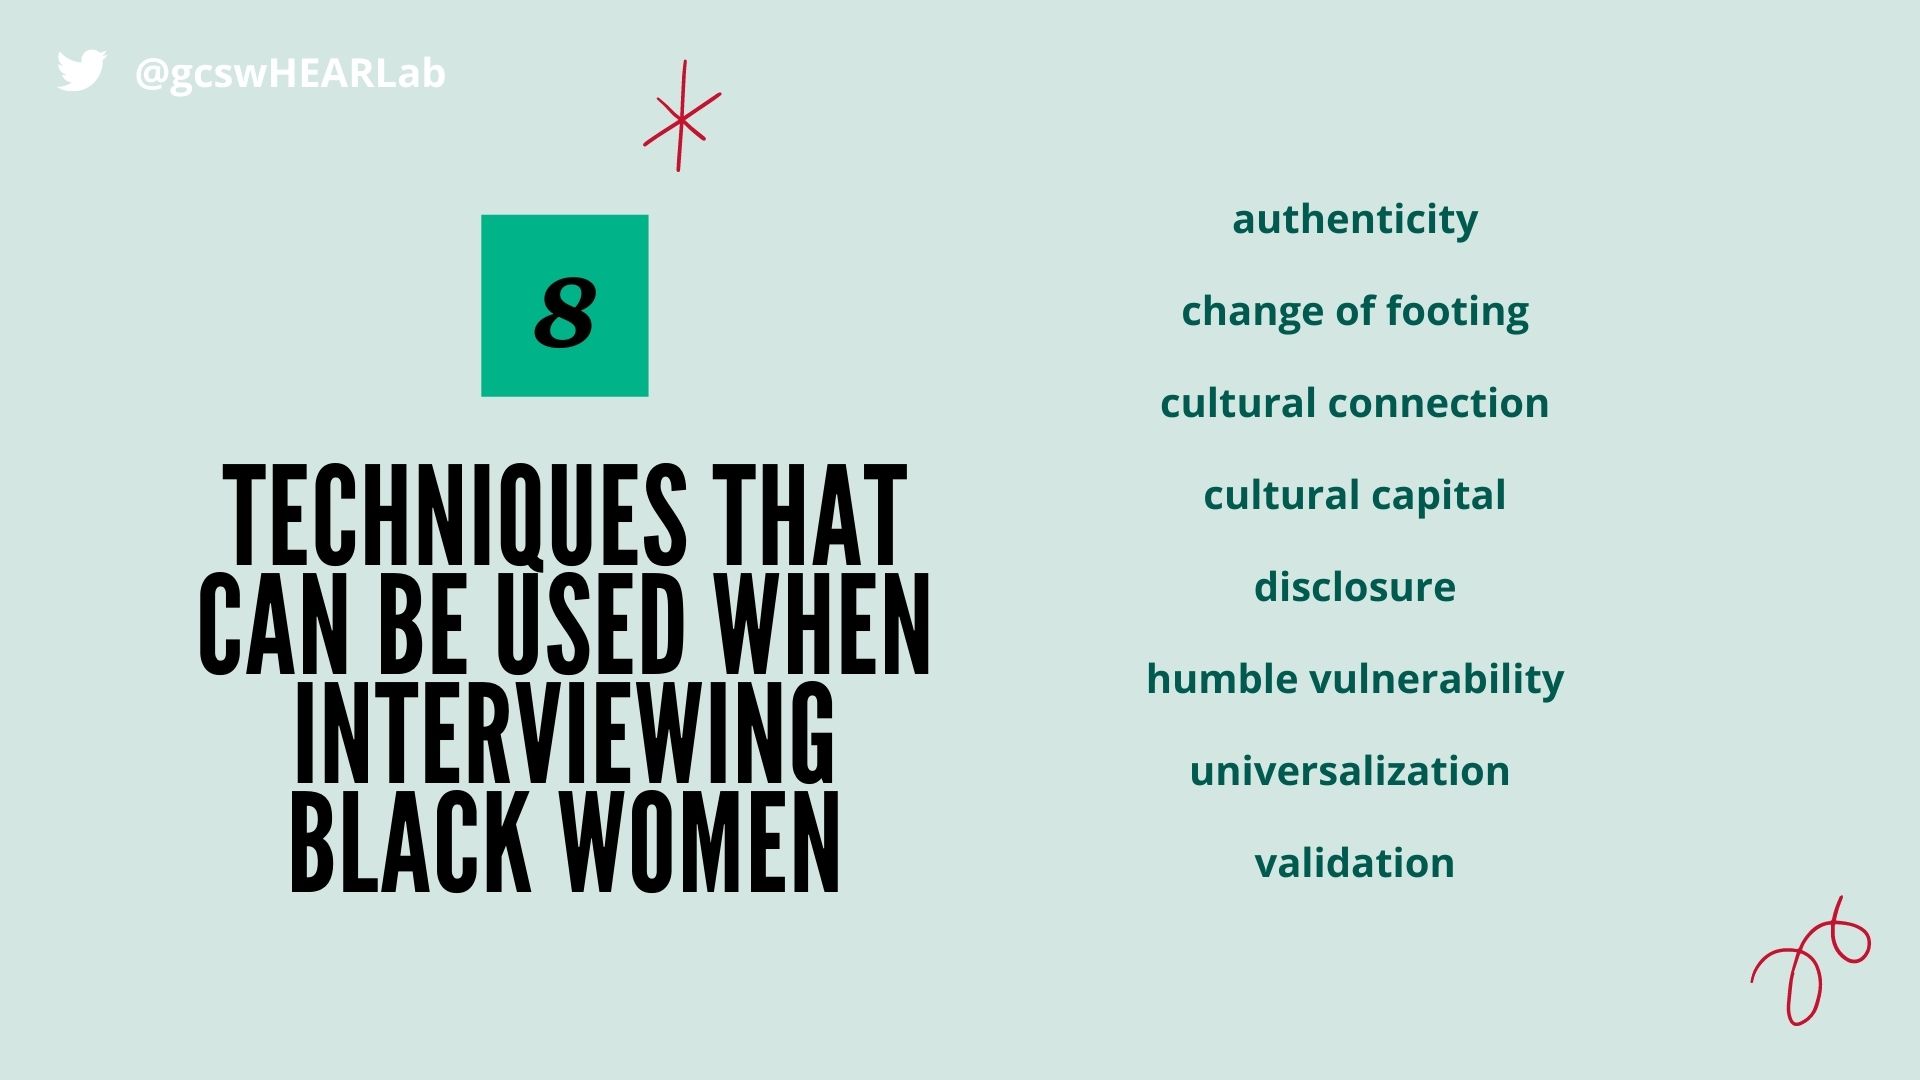 8 Techniques that can be used when interviewing Black women: authenticity, change of footing, cultural connection, cultural capital, disclosure, humble vulnerability, universalization, validation.